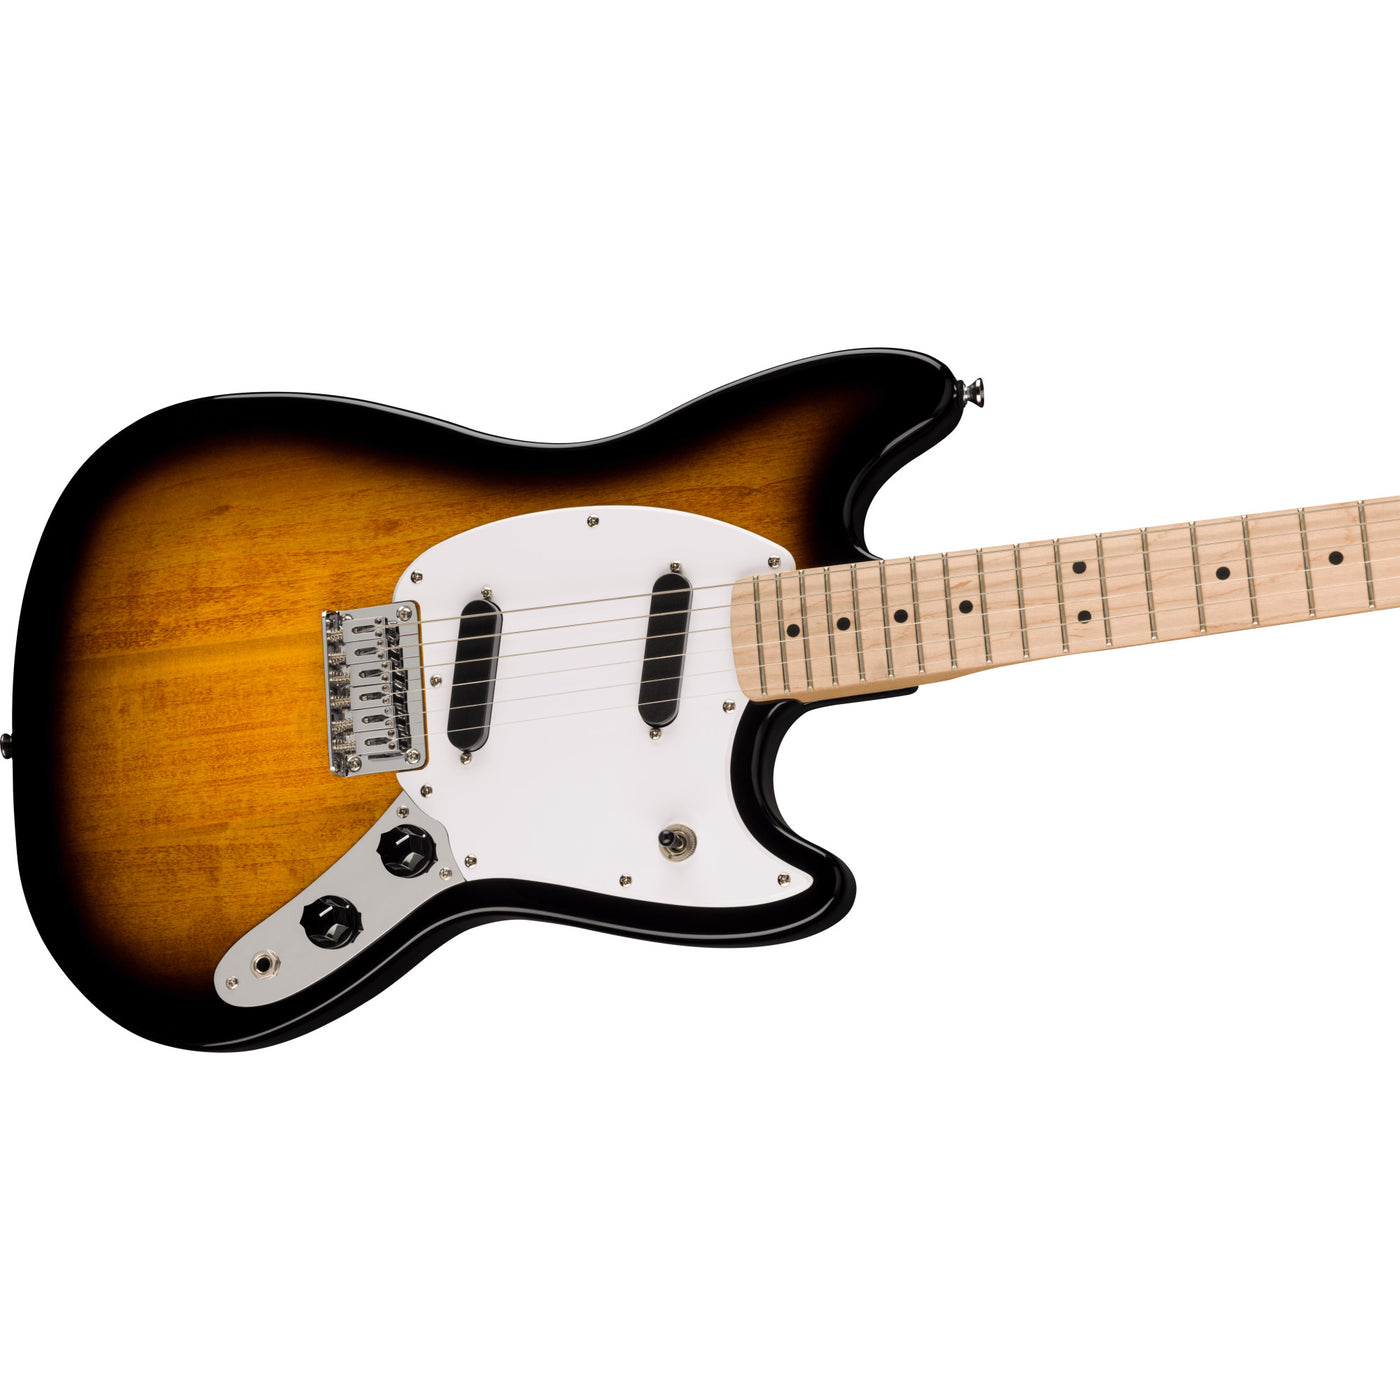 Squier Sonic Mustang Electric Guitar, Two Color Sunburst (0373652503)